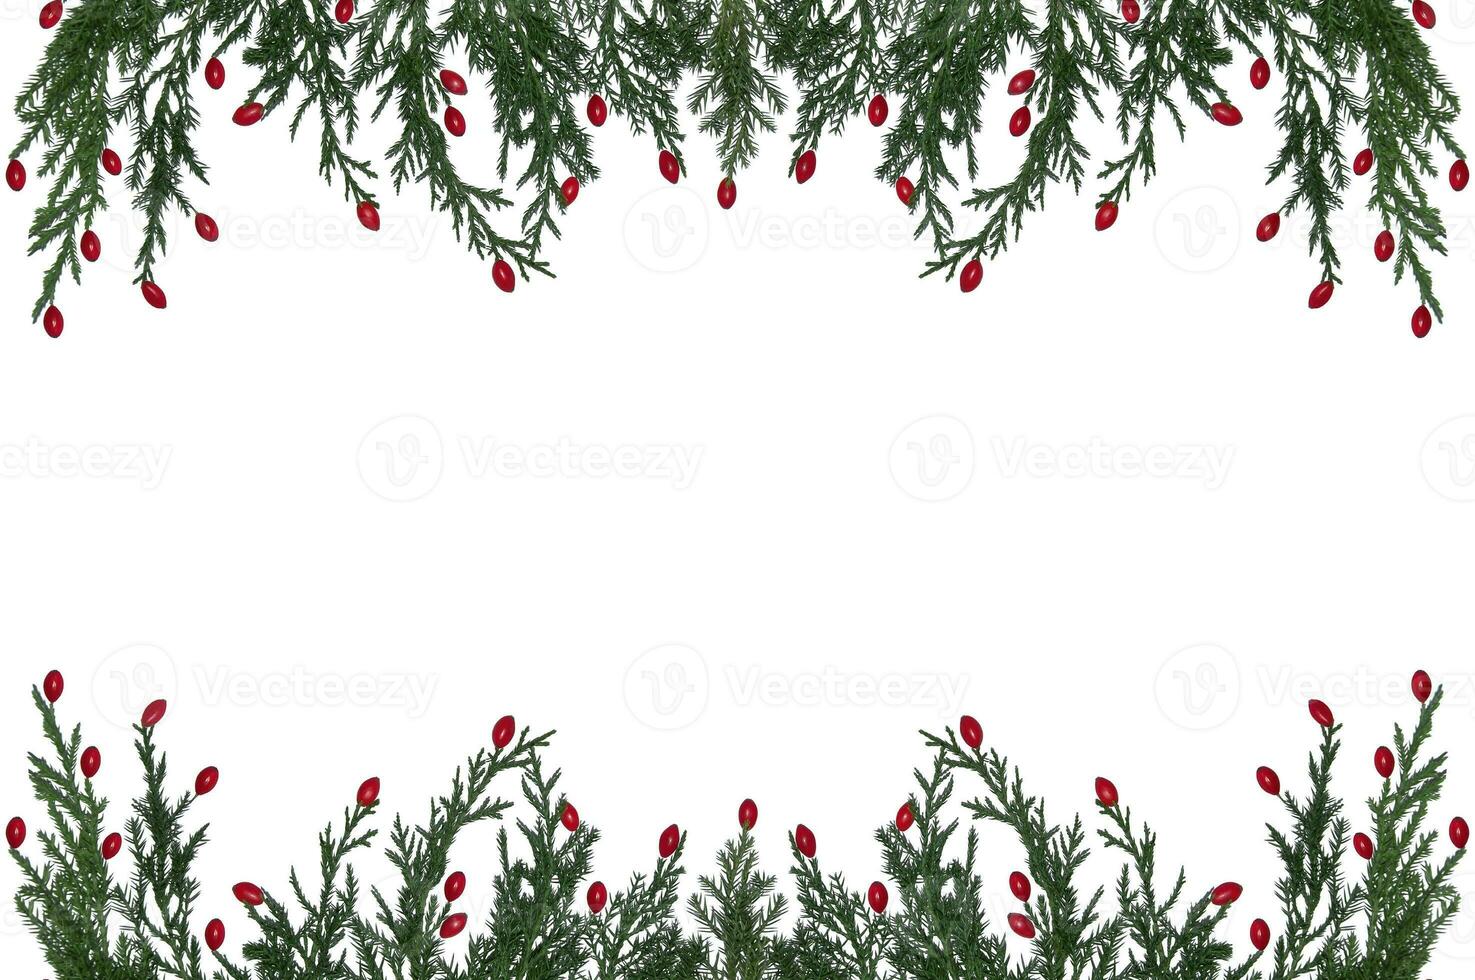 Branches of a natural Christmas tree with red barberry berries on a white background. Isolated image. Christmas tree branches frame photo